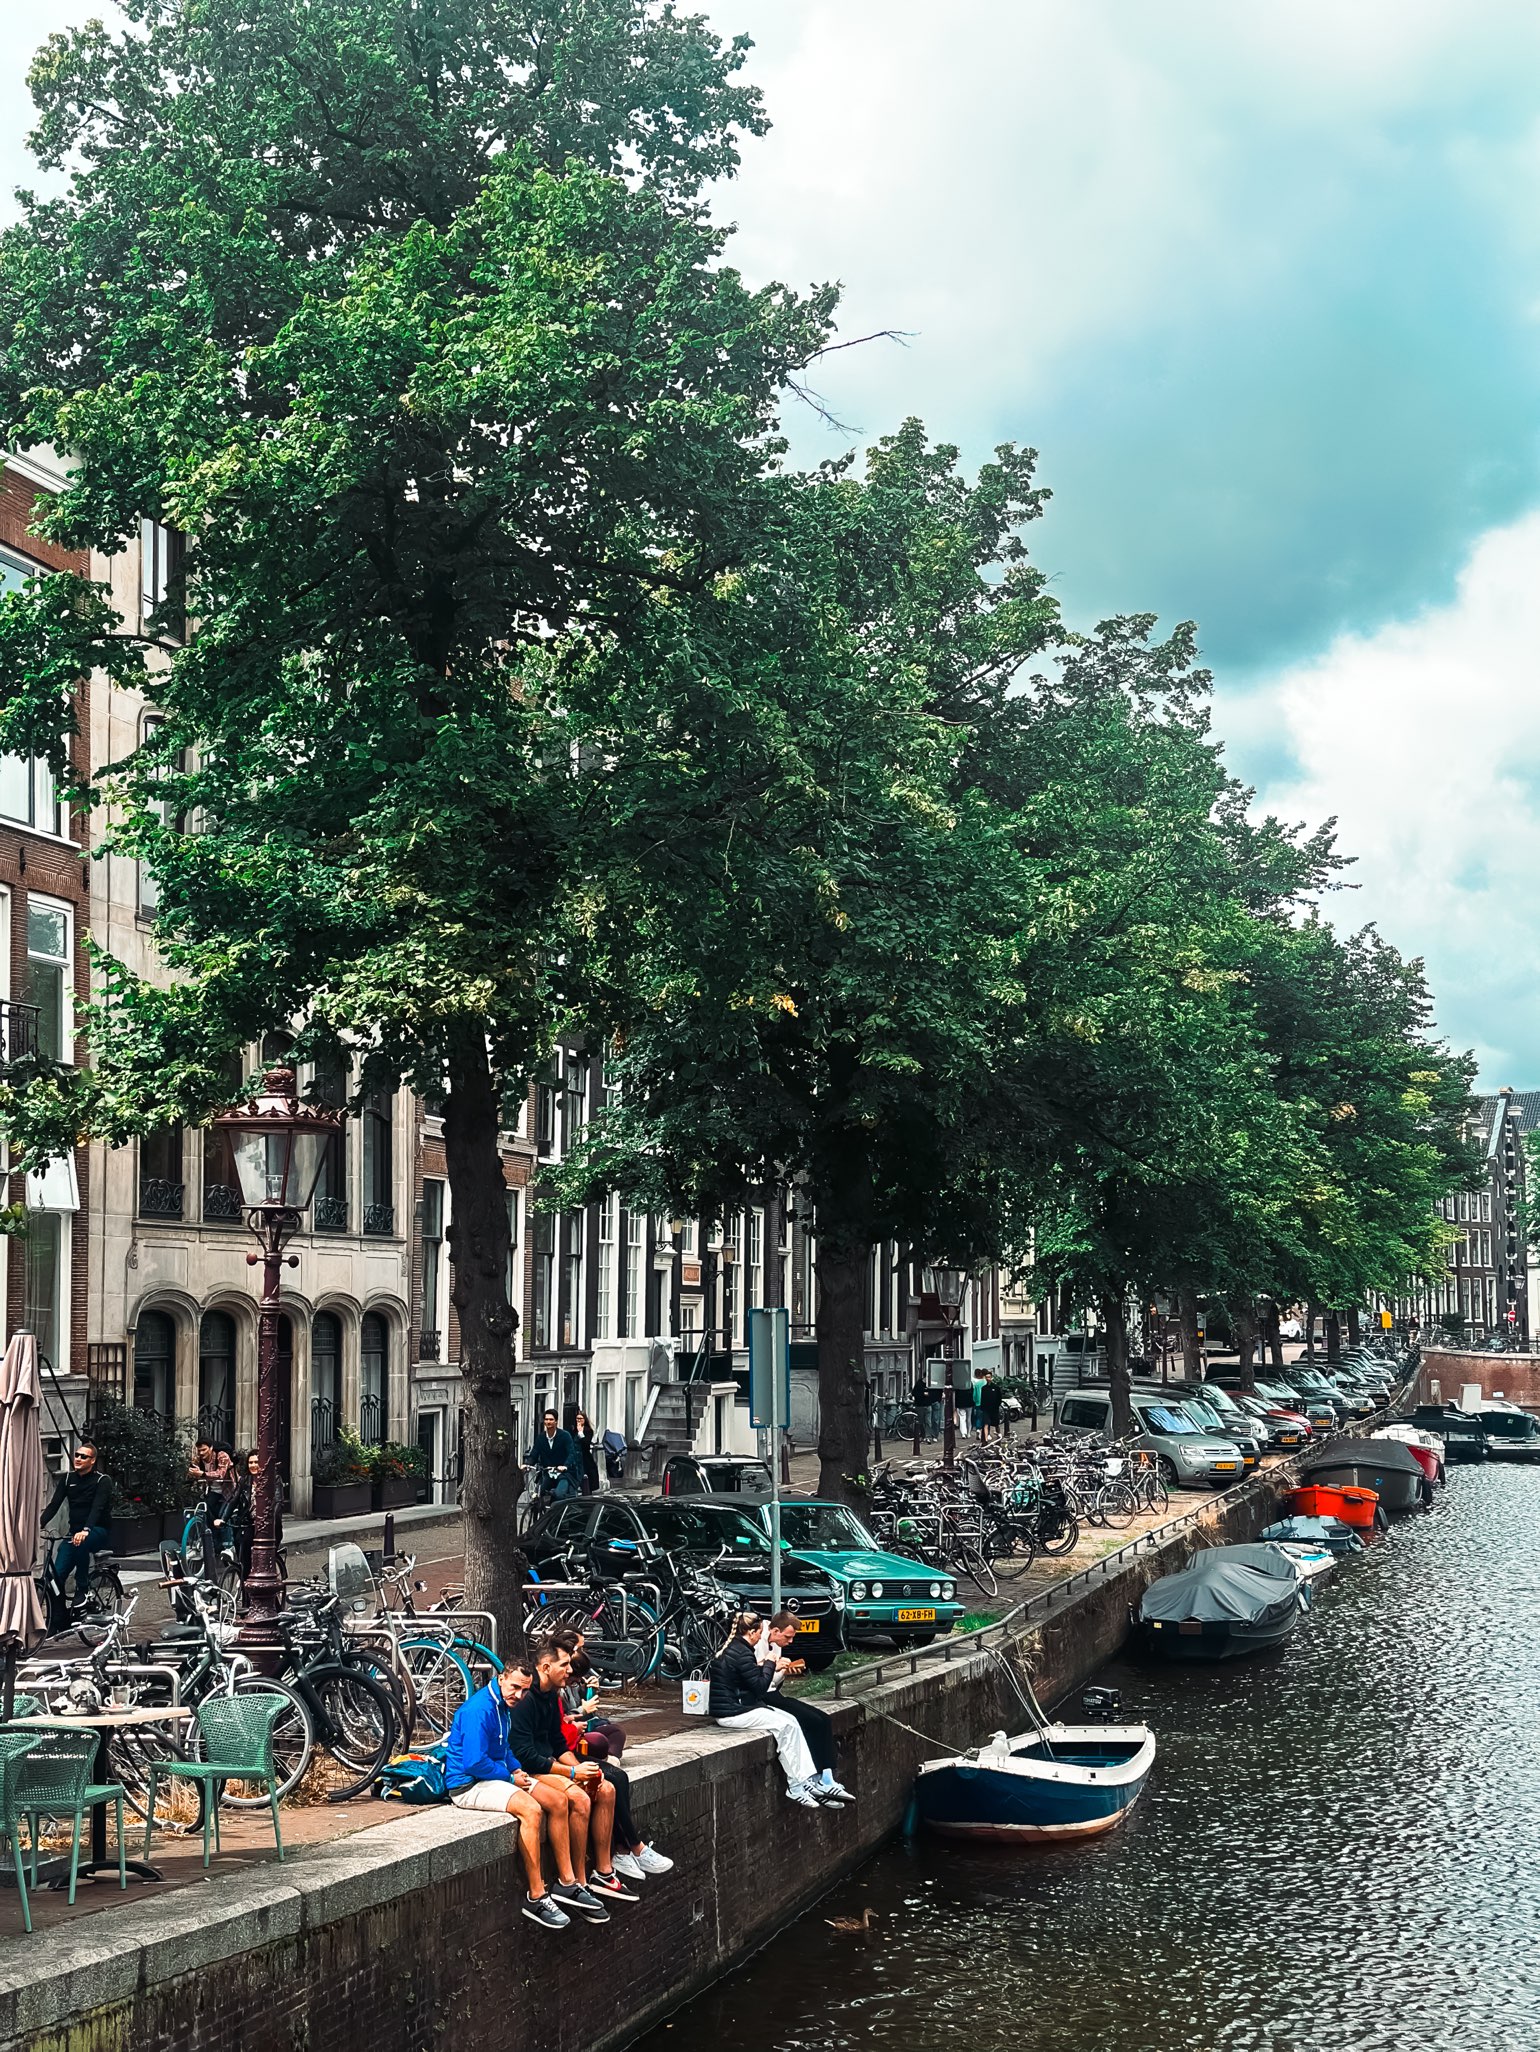 Canals in Amsterdam, The Netherlands🇳🇱📌 | Trip.com Amsterdam